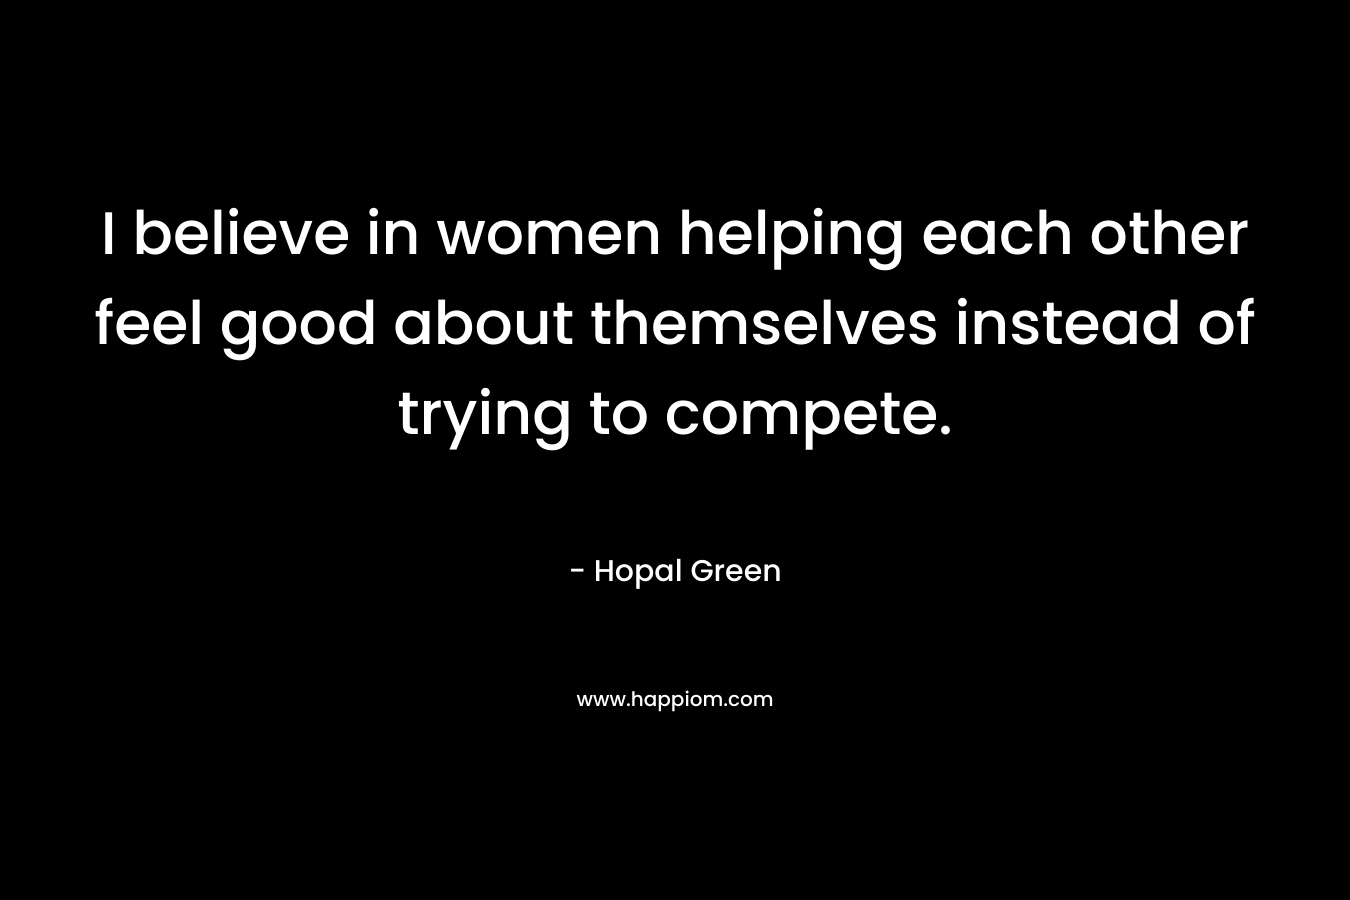 I believe in women helping each other feel good about themselves instead of trying to compete.